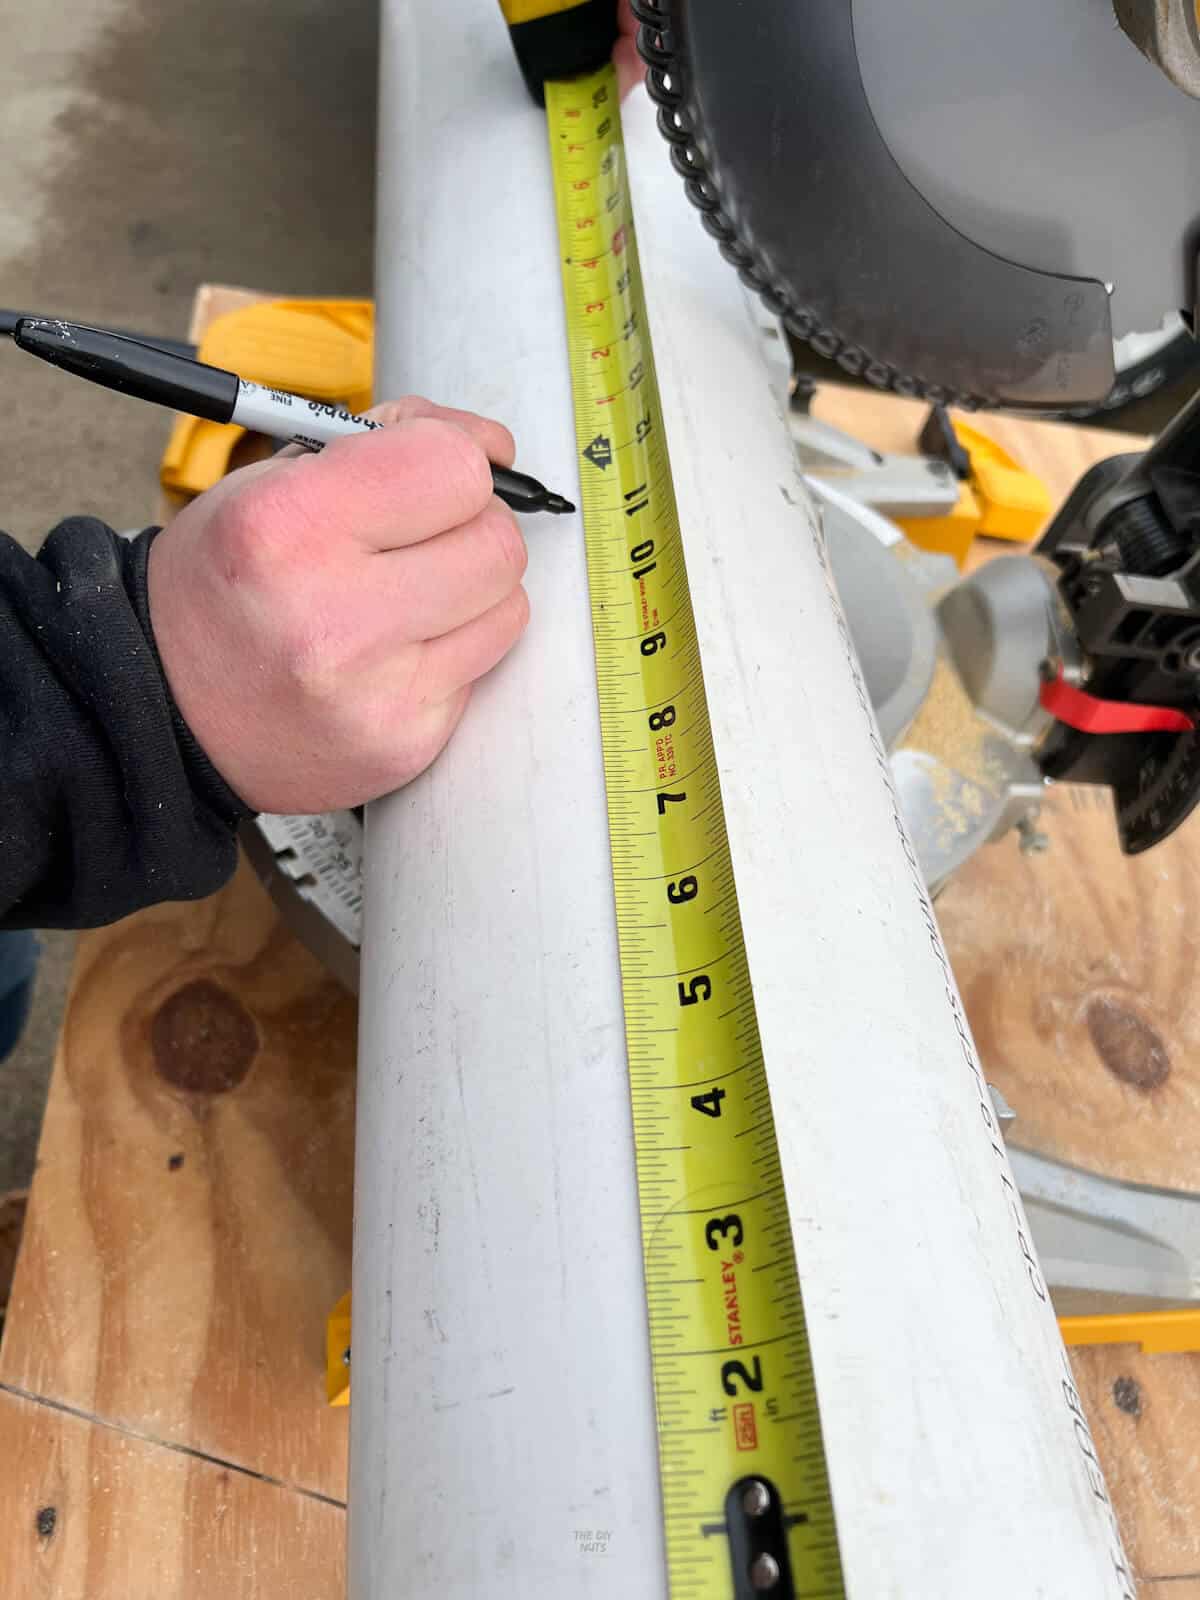 Use a tape measurer and sharpie marker to mark length on PVC pipe.